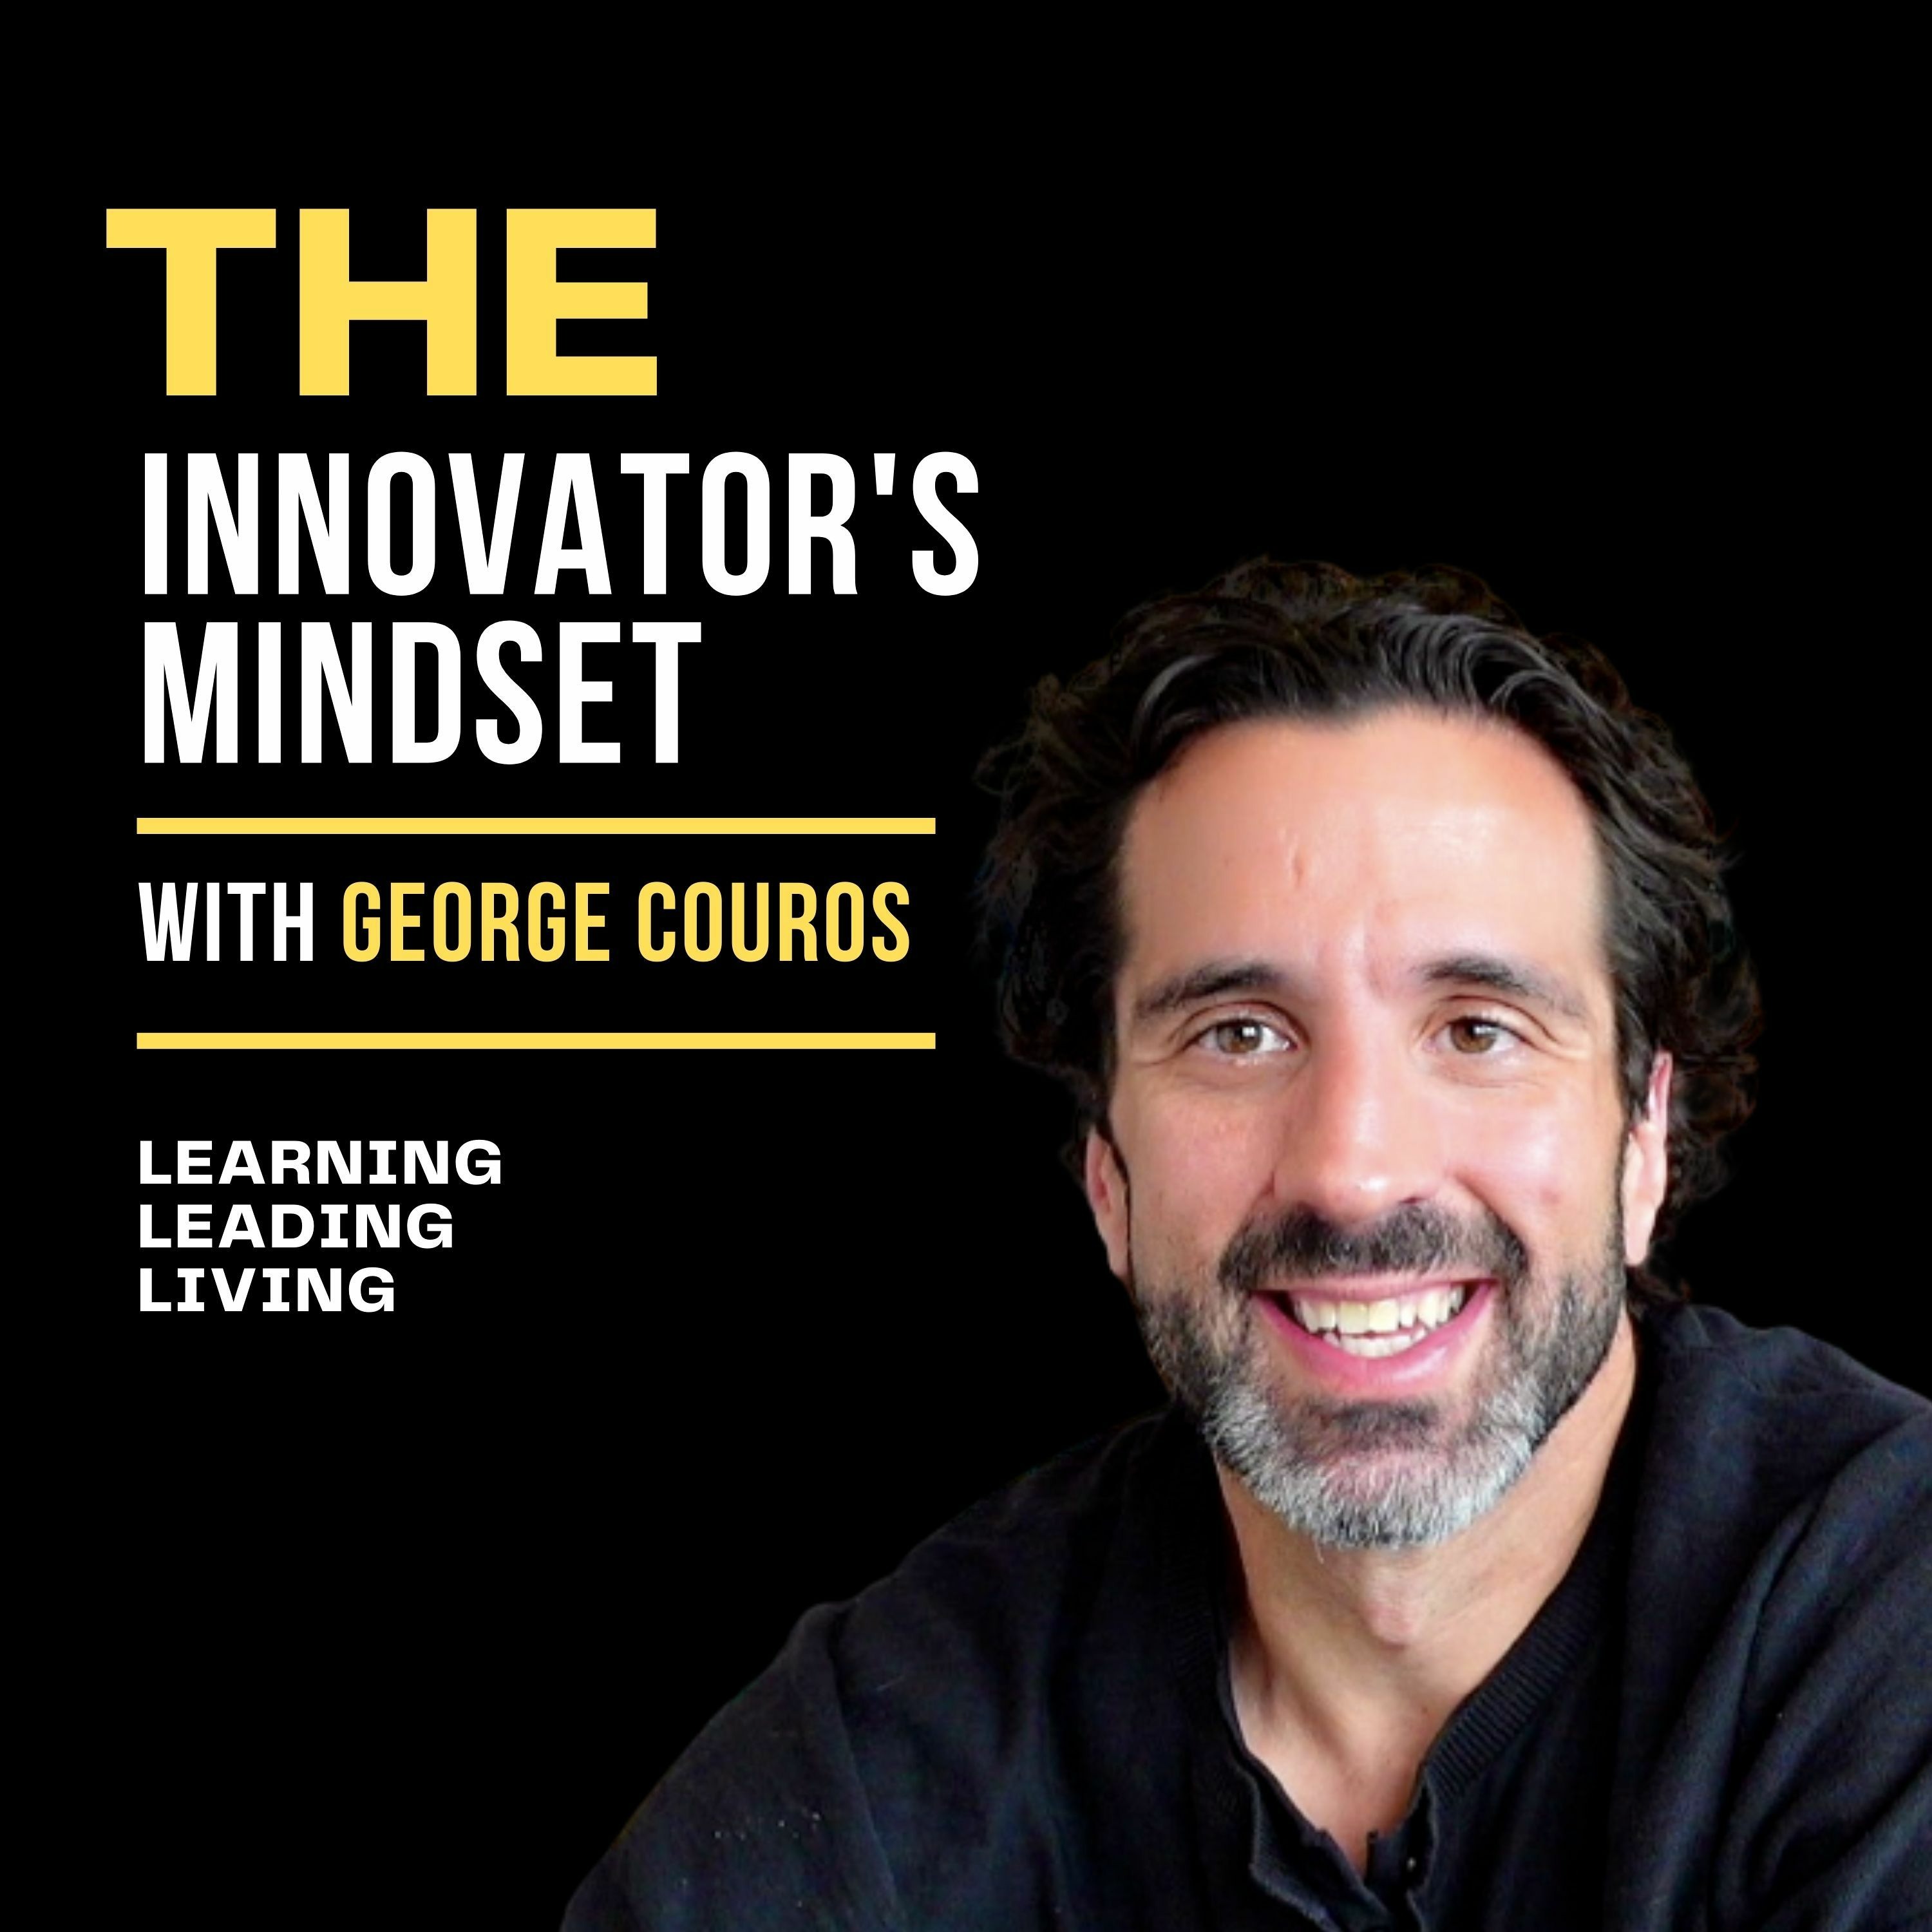 3 Questions on Educators that Inspire with Cale Birk - The #InnovatorsMindset #Podcast